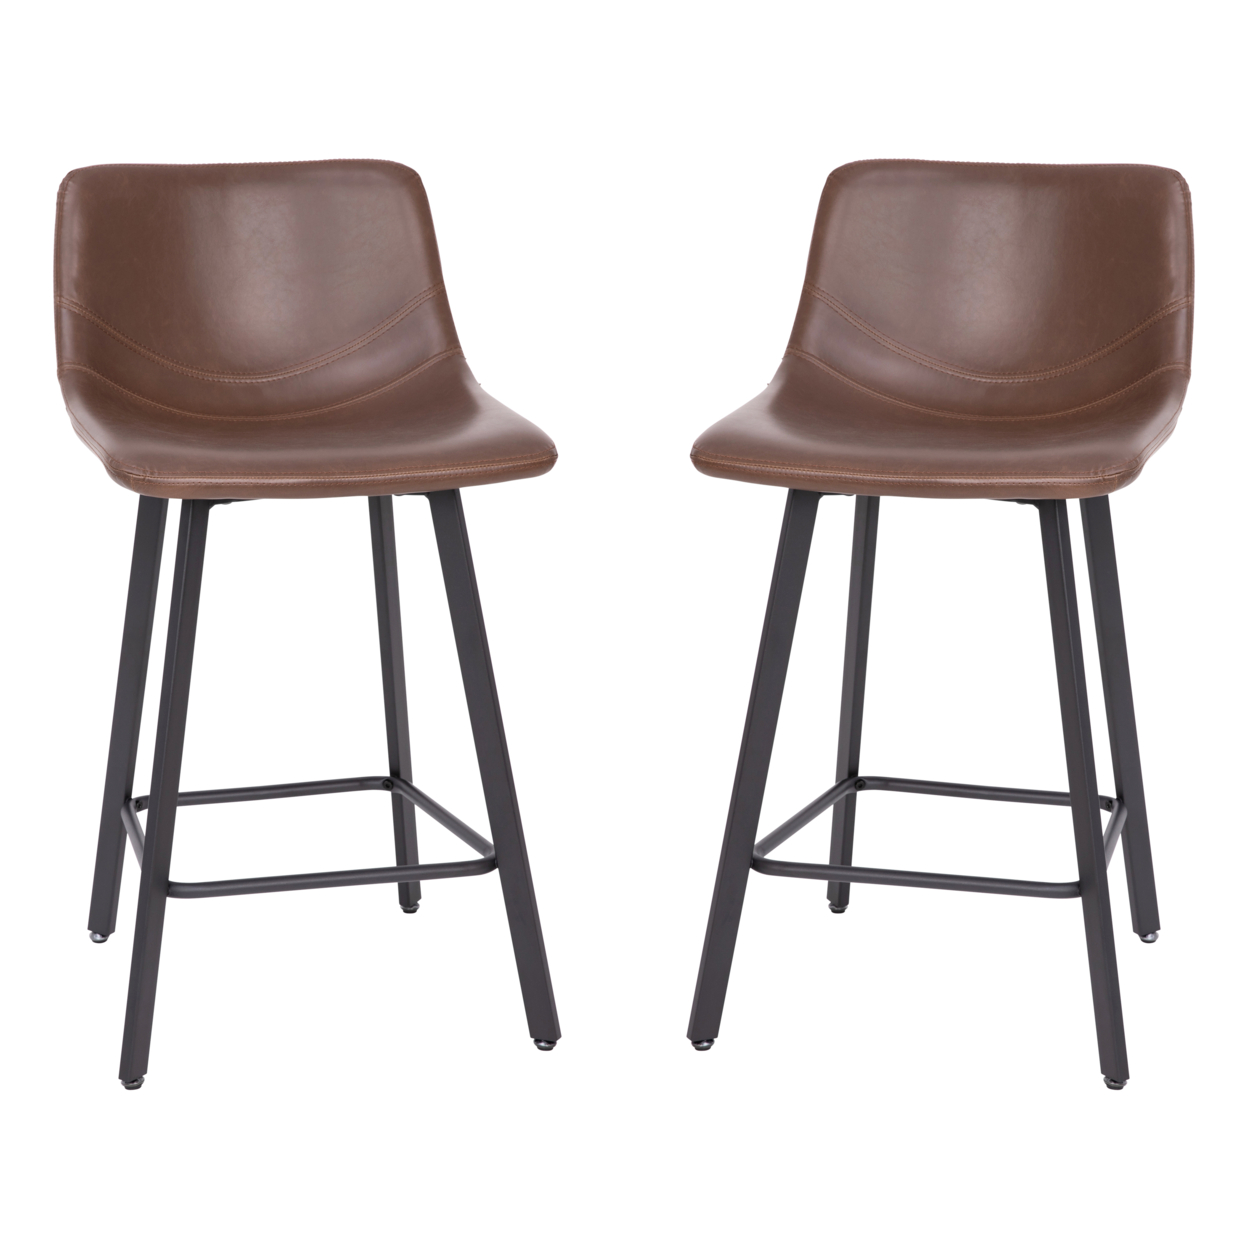 2PK 24 Brown Leather Stools